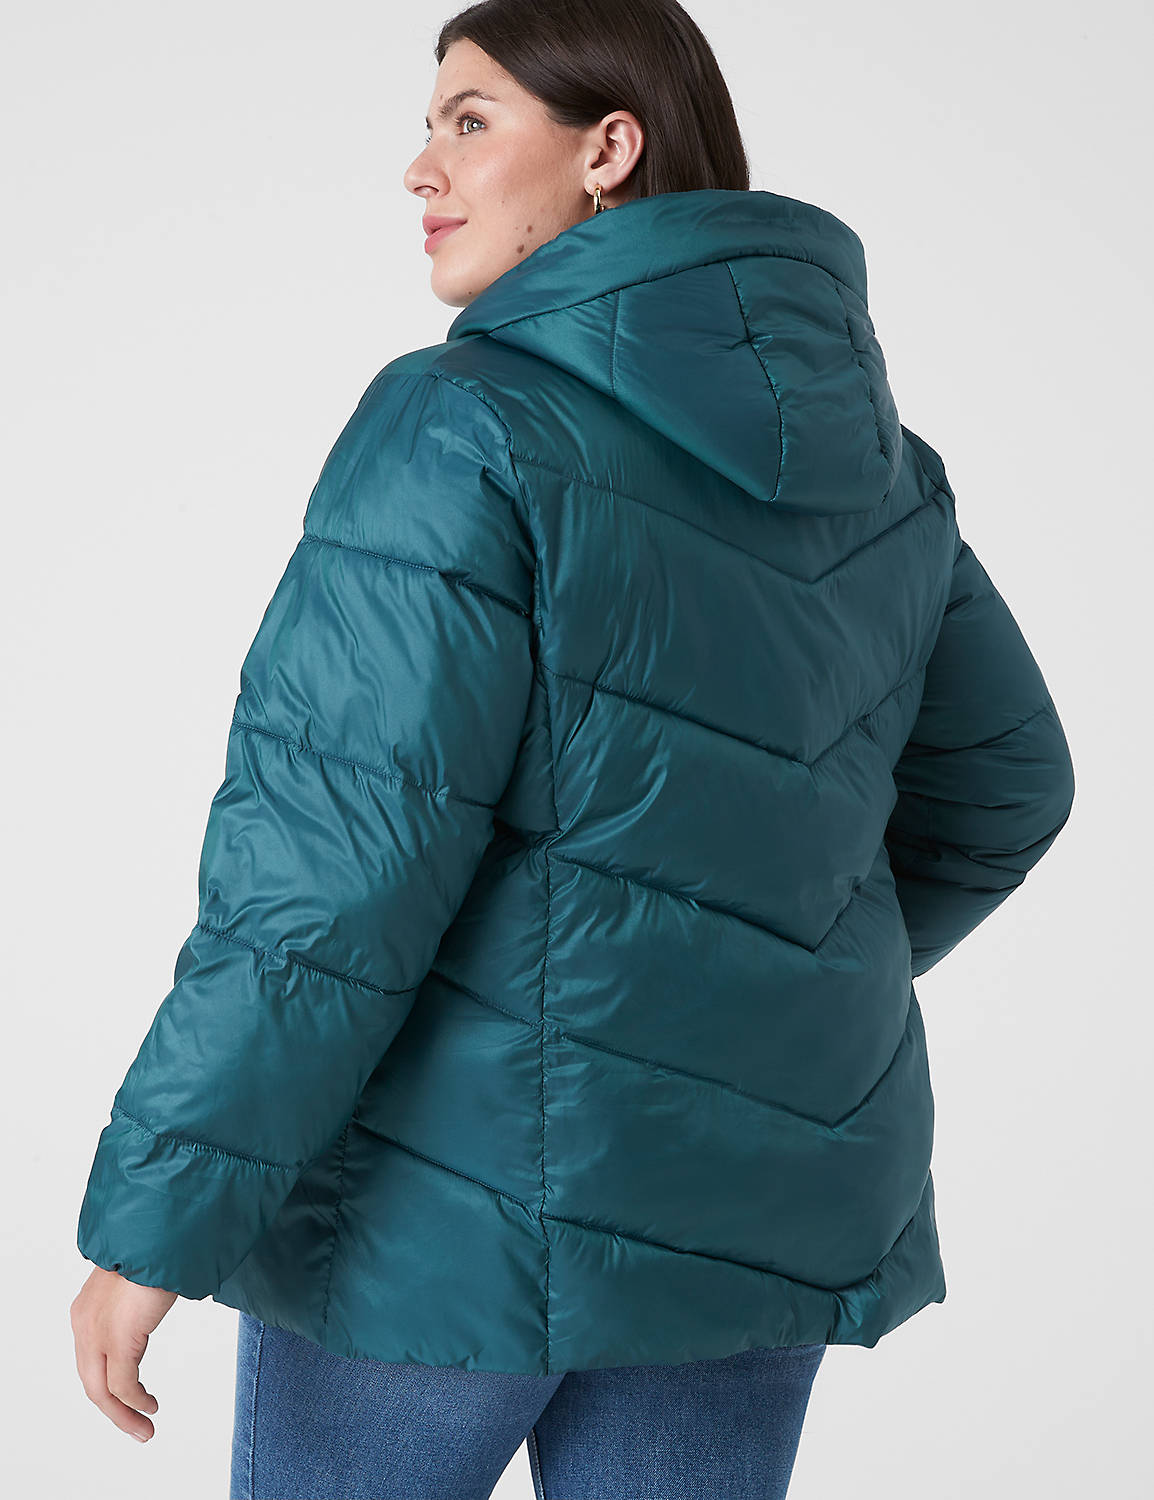 REGULAR LENGTH PUFFER with Hood 113 Product Image 2